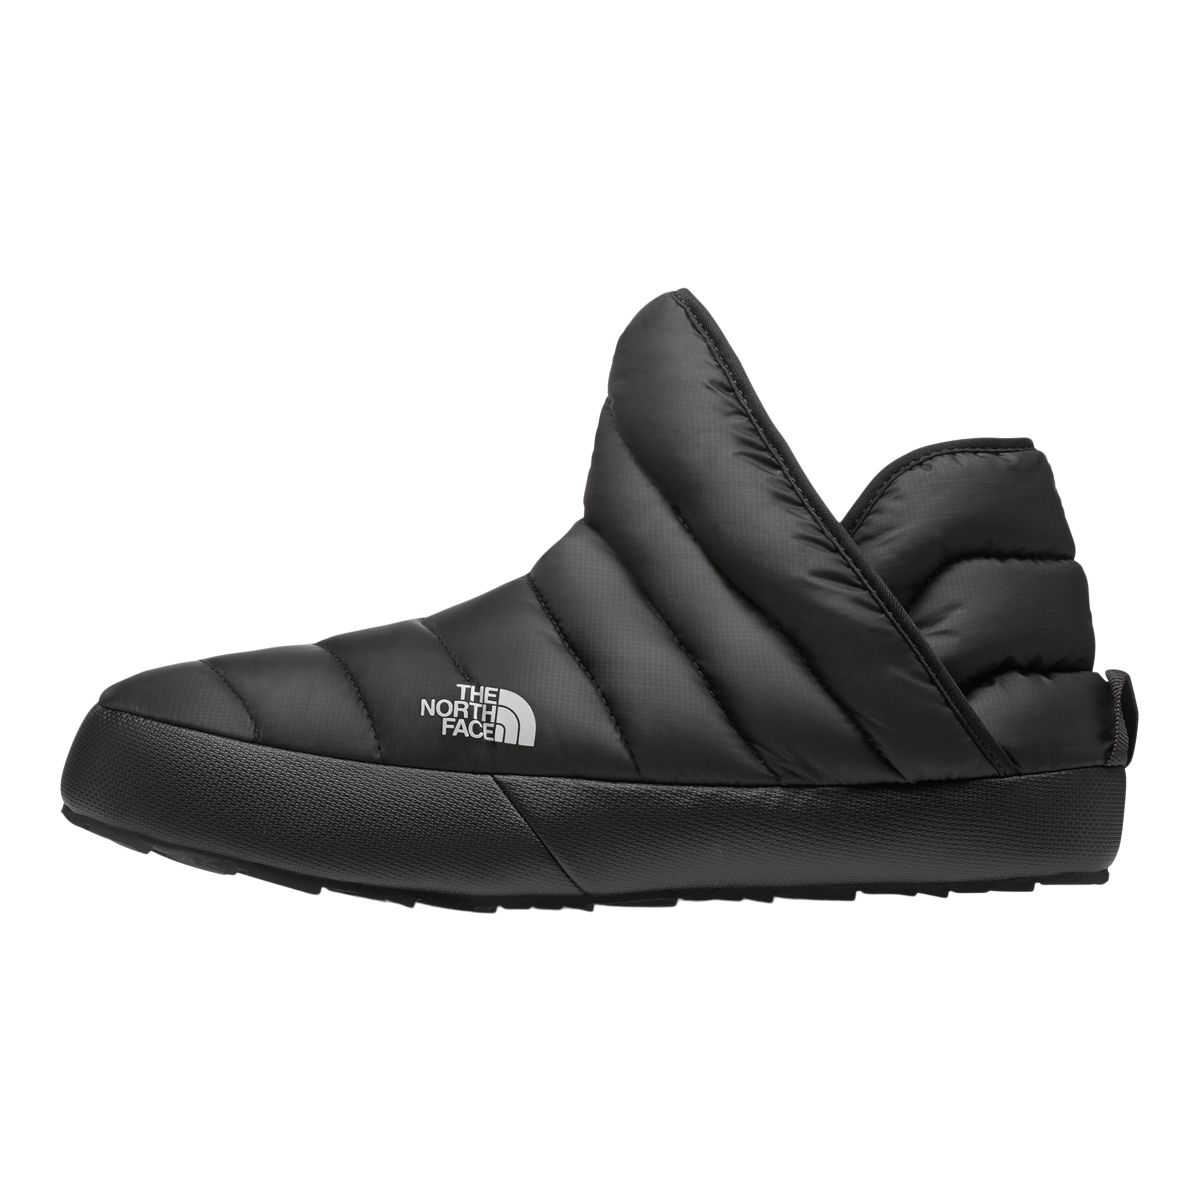 The North Face Men's Thermoball Traction Booties  Slippers